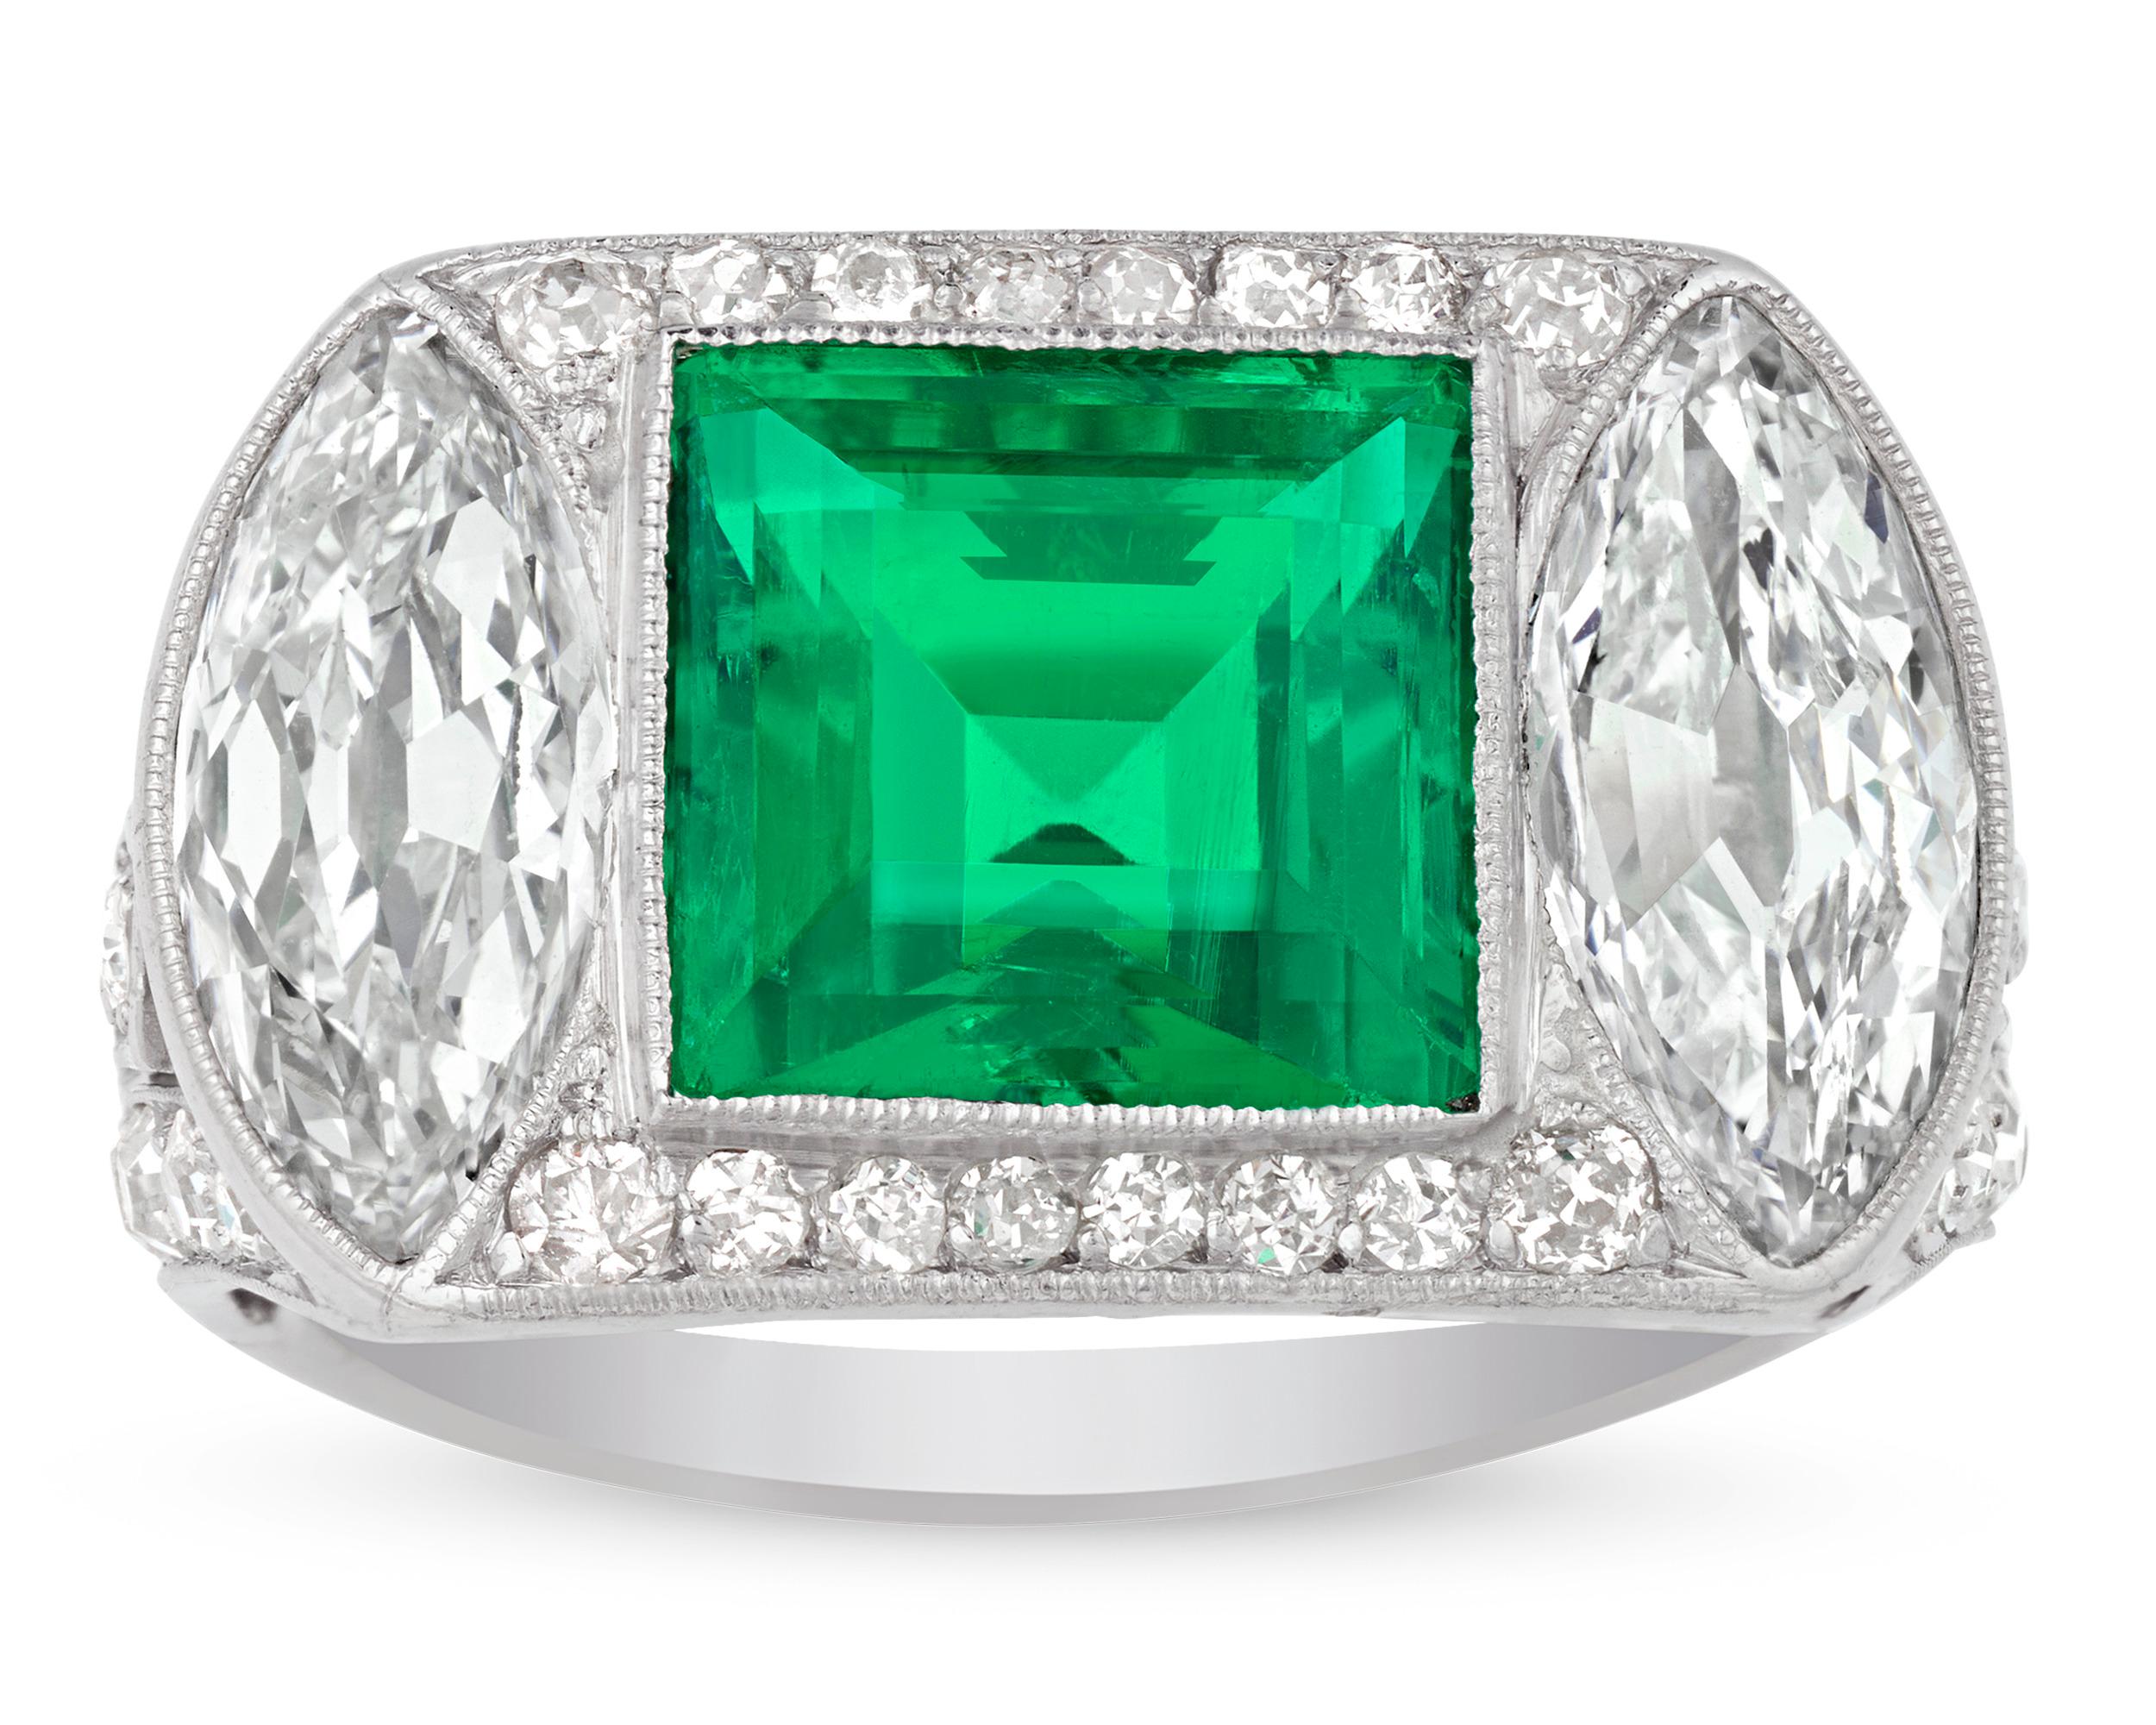 Art Deco-era elegance is reflected in this captivating emerald and diamond ring. The 2.89-carat emerald is certified by the American Gemological Laboratories as originating in Colombia and being completely free of oil and other treatments to enhance